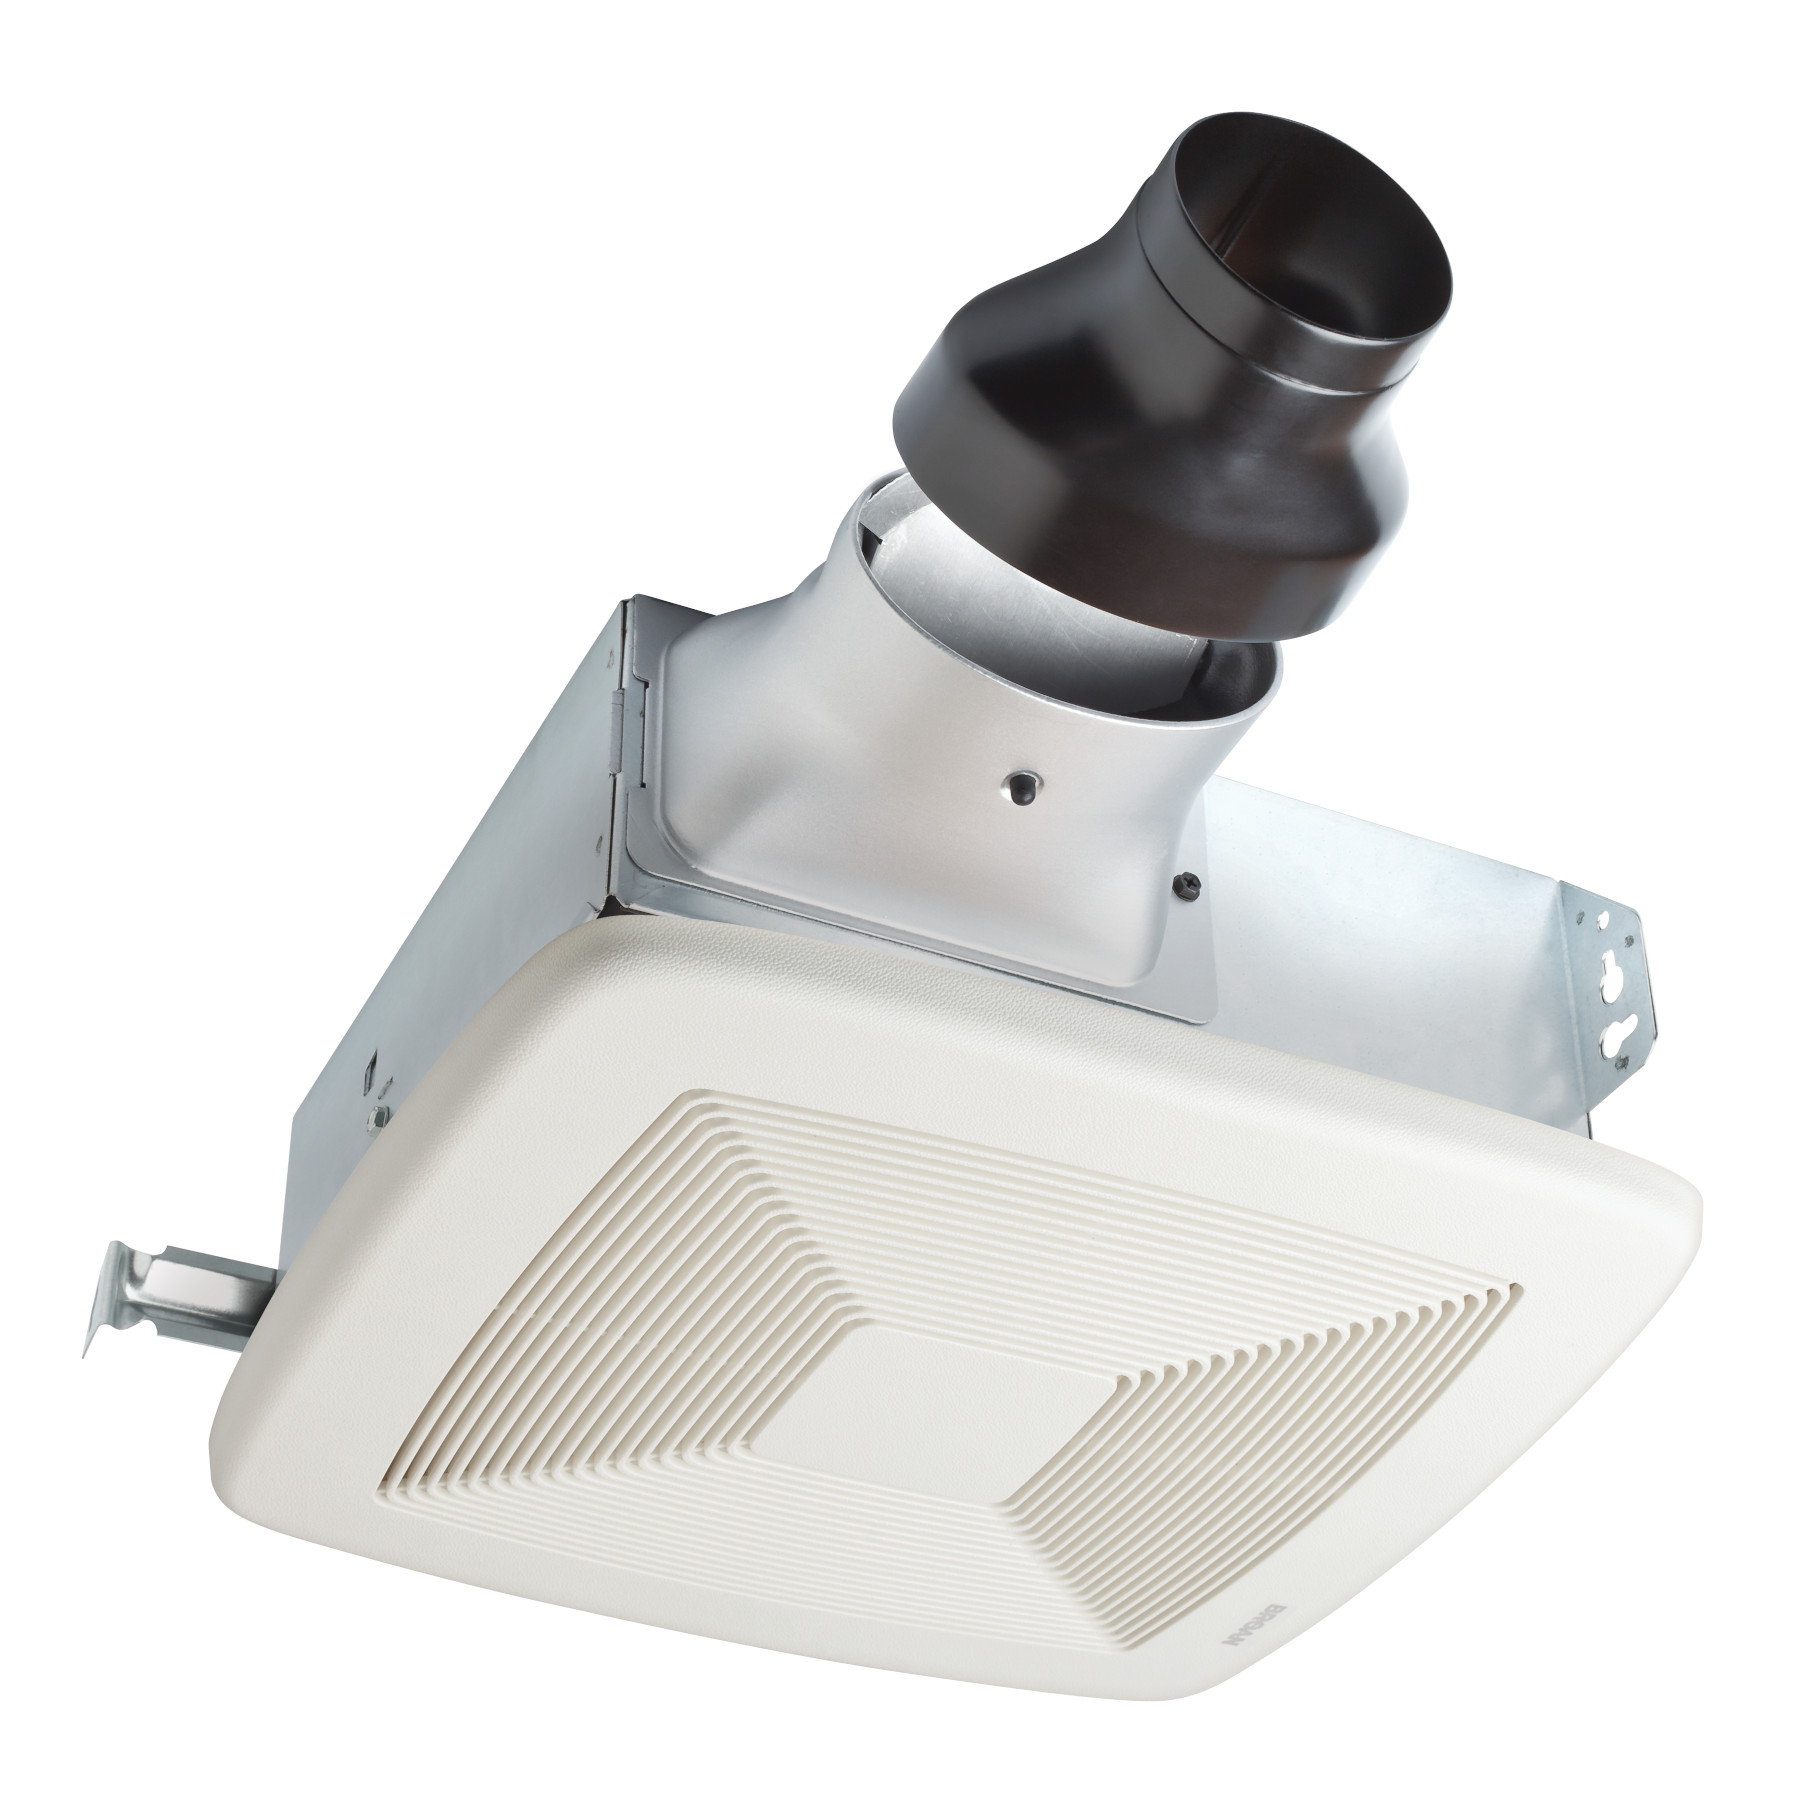 LoProfile 80 CFM Ceiling/Wall Exhaust Fan for Bathroom or Garage with 4 in. Oval Duct or 3 in. Round Duct, ENERGY STAR* 